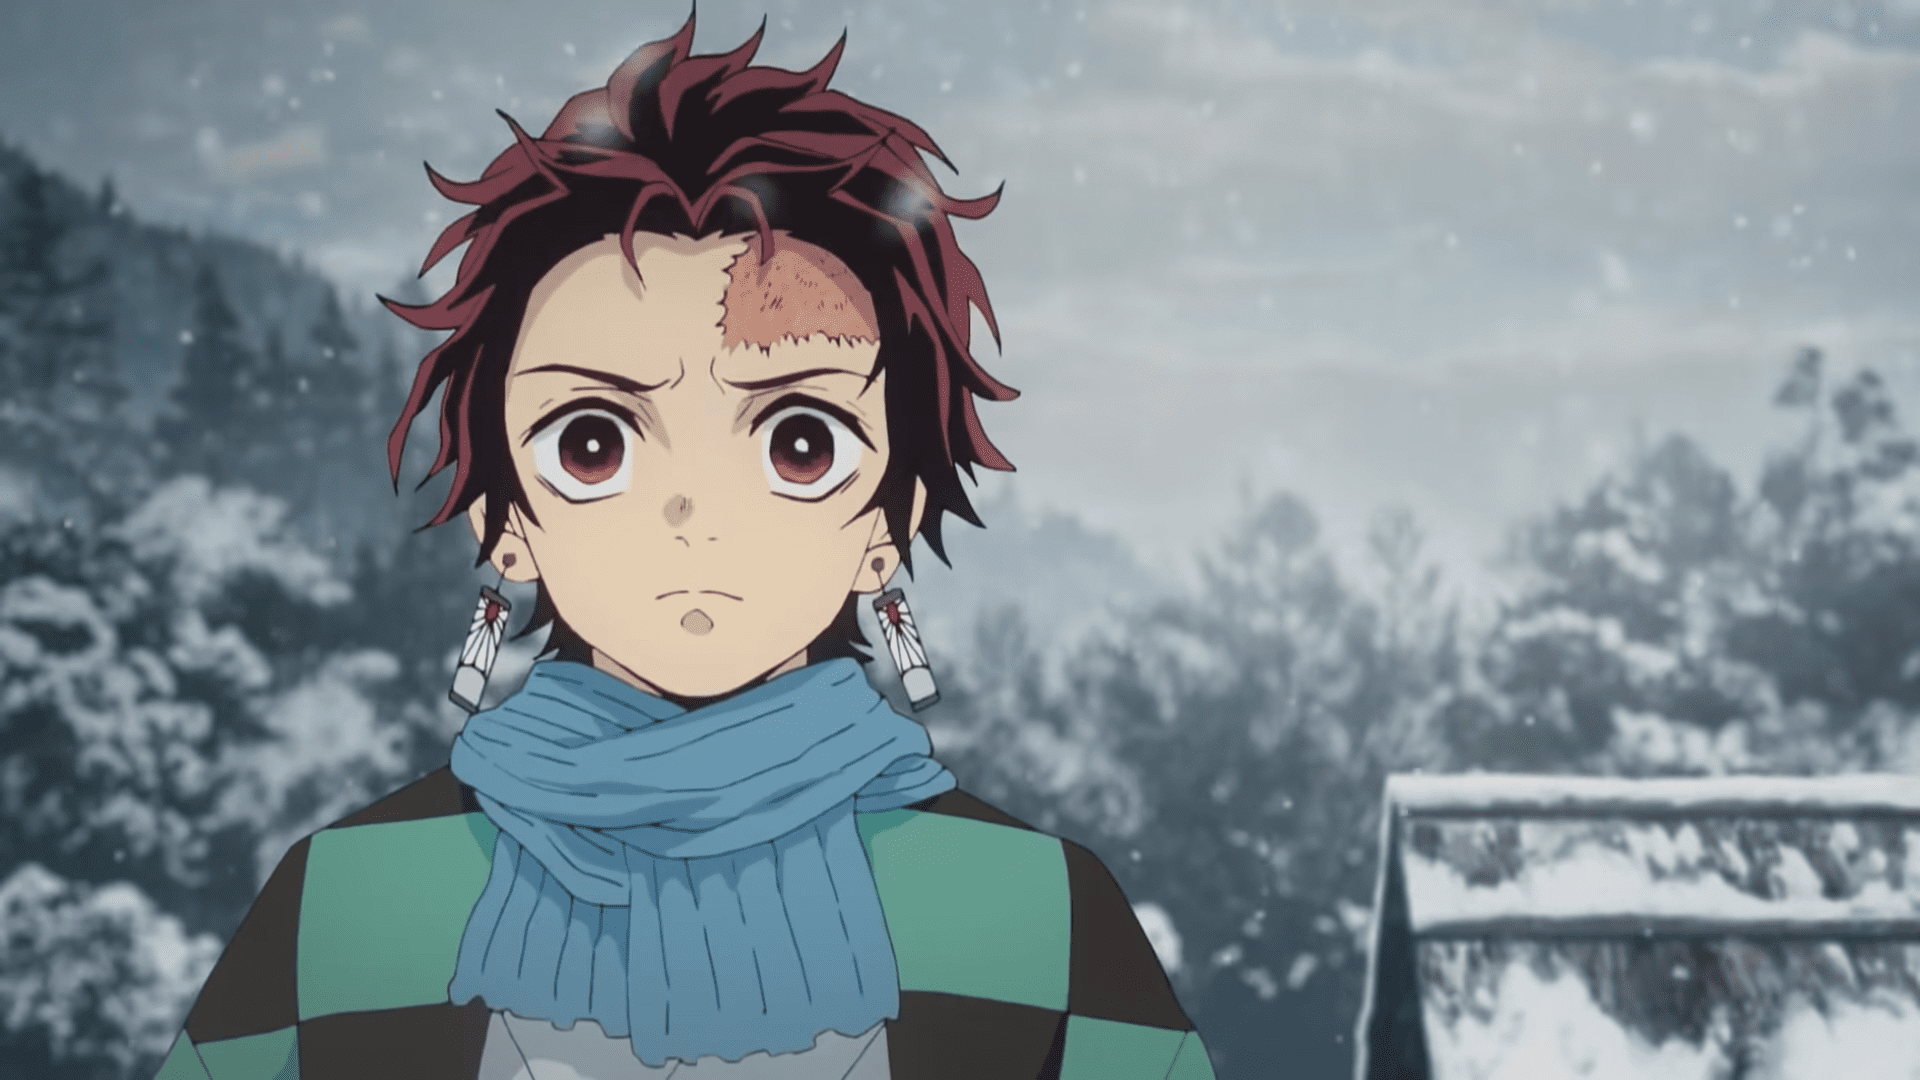 13 Main Demon Slayer Characters' Age, Birthday, and Height - Peto Rugs